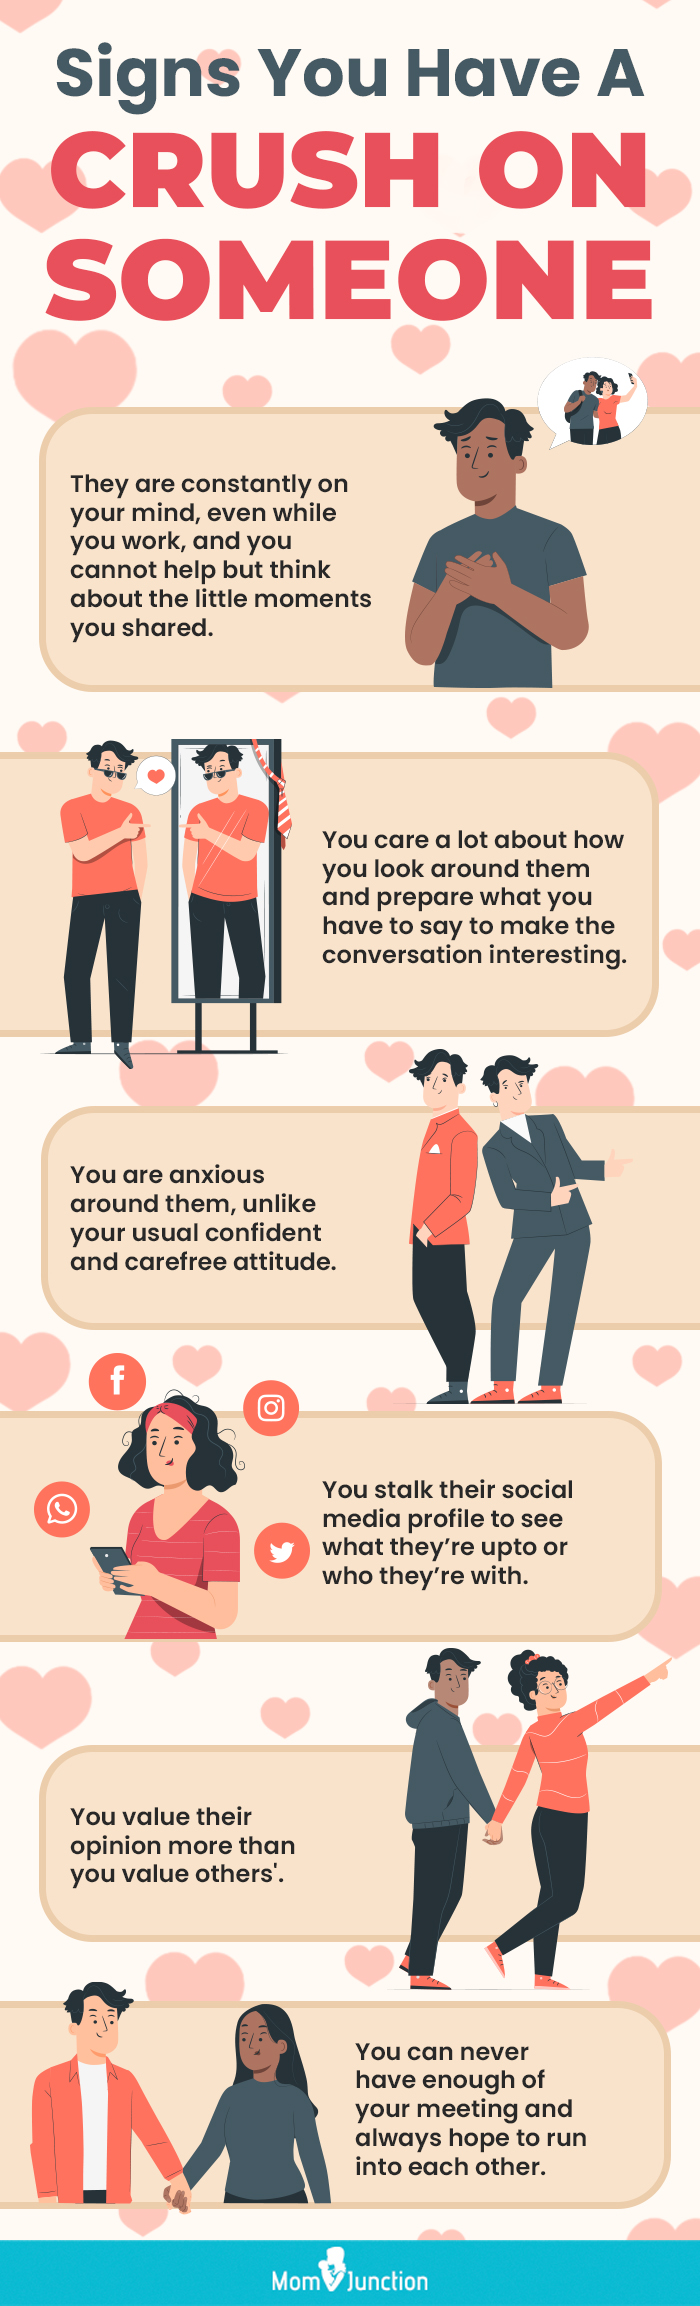 signs you have a crush on someone (infographic)